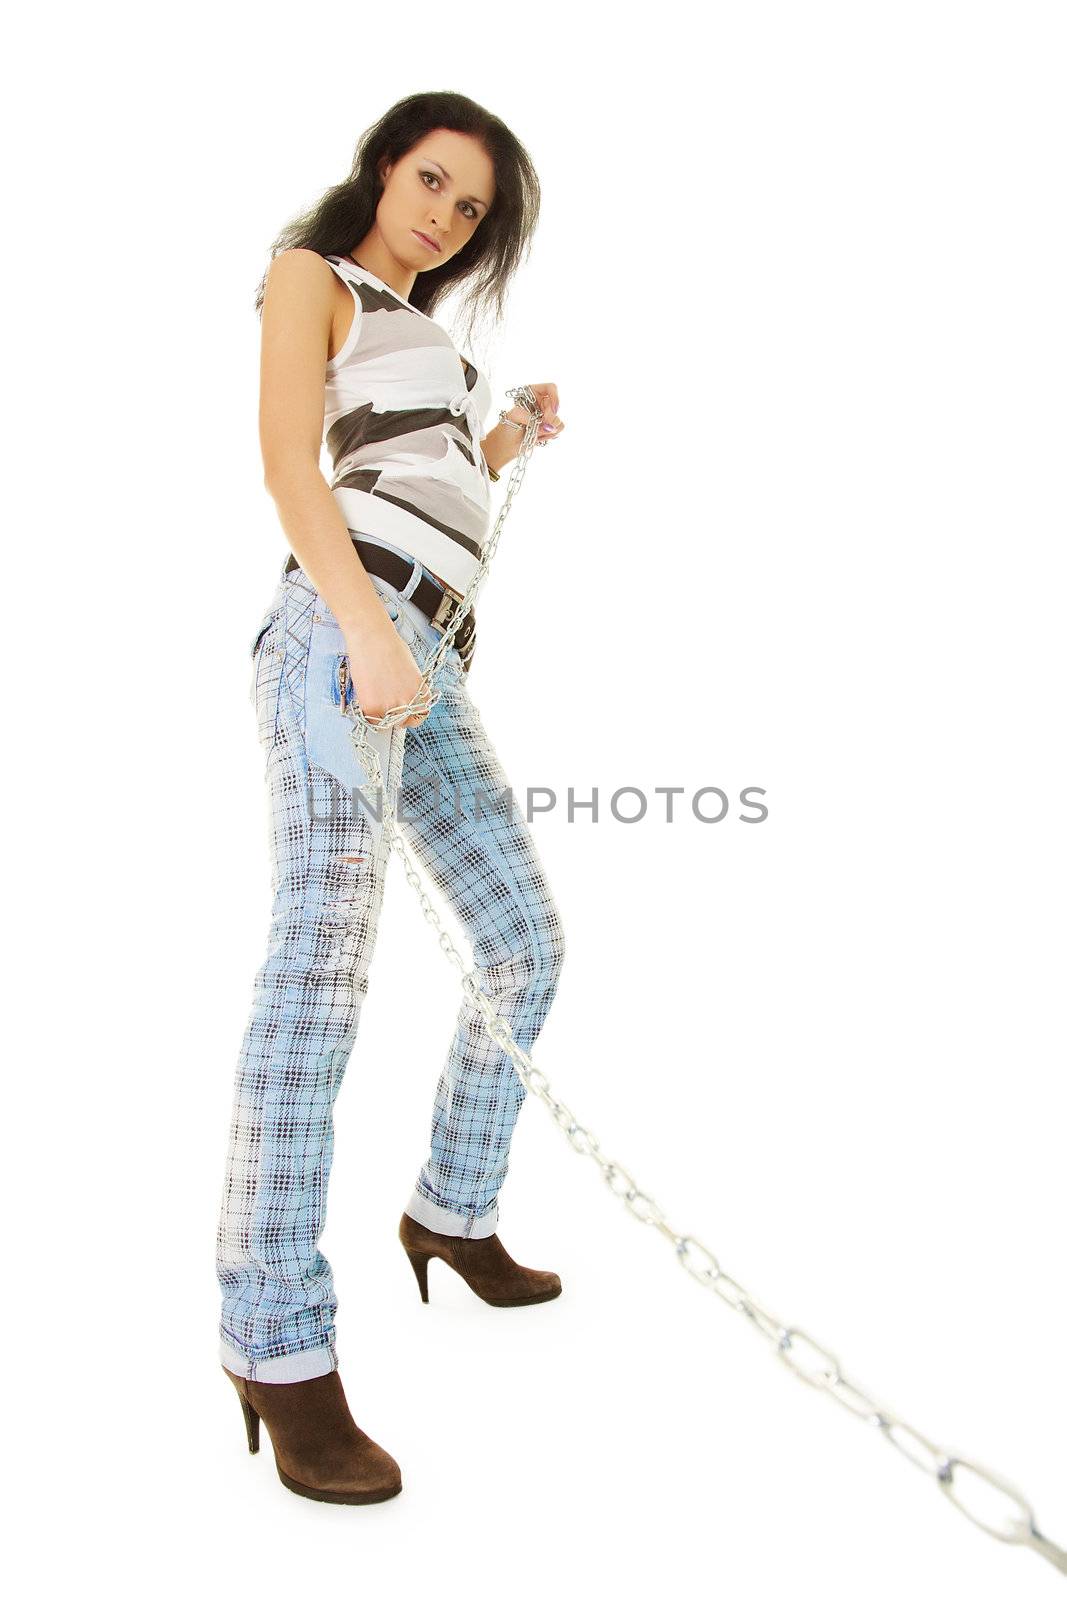 A young woman walks on a chain your dog on white background